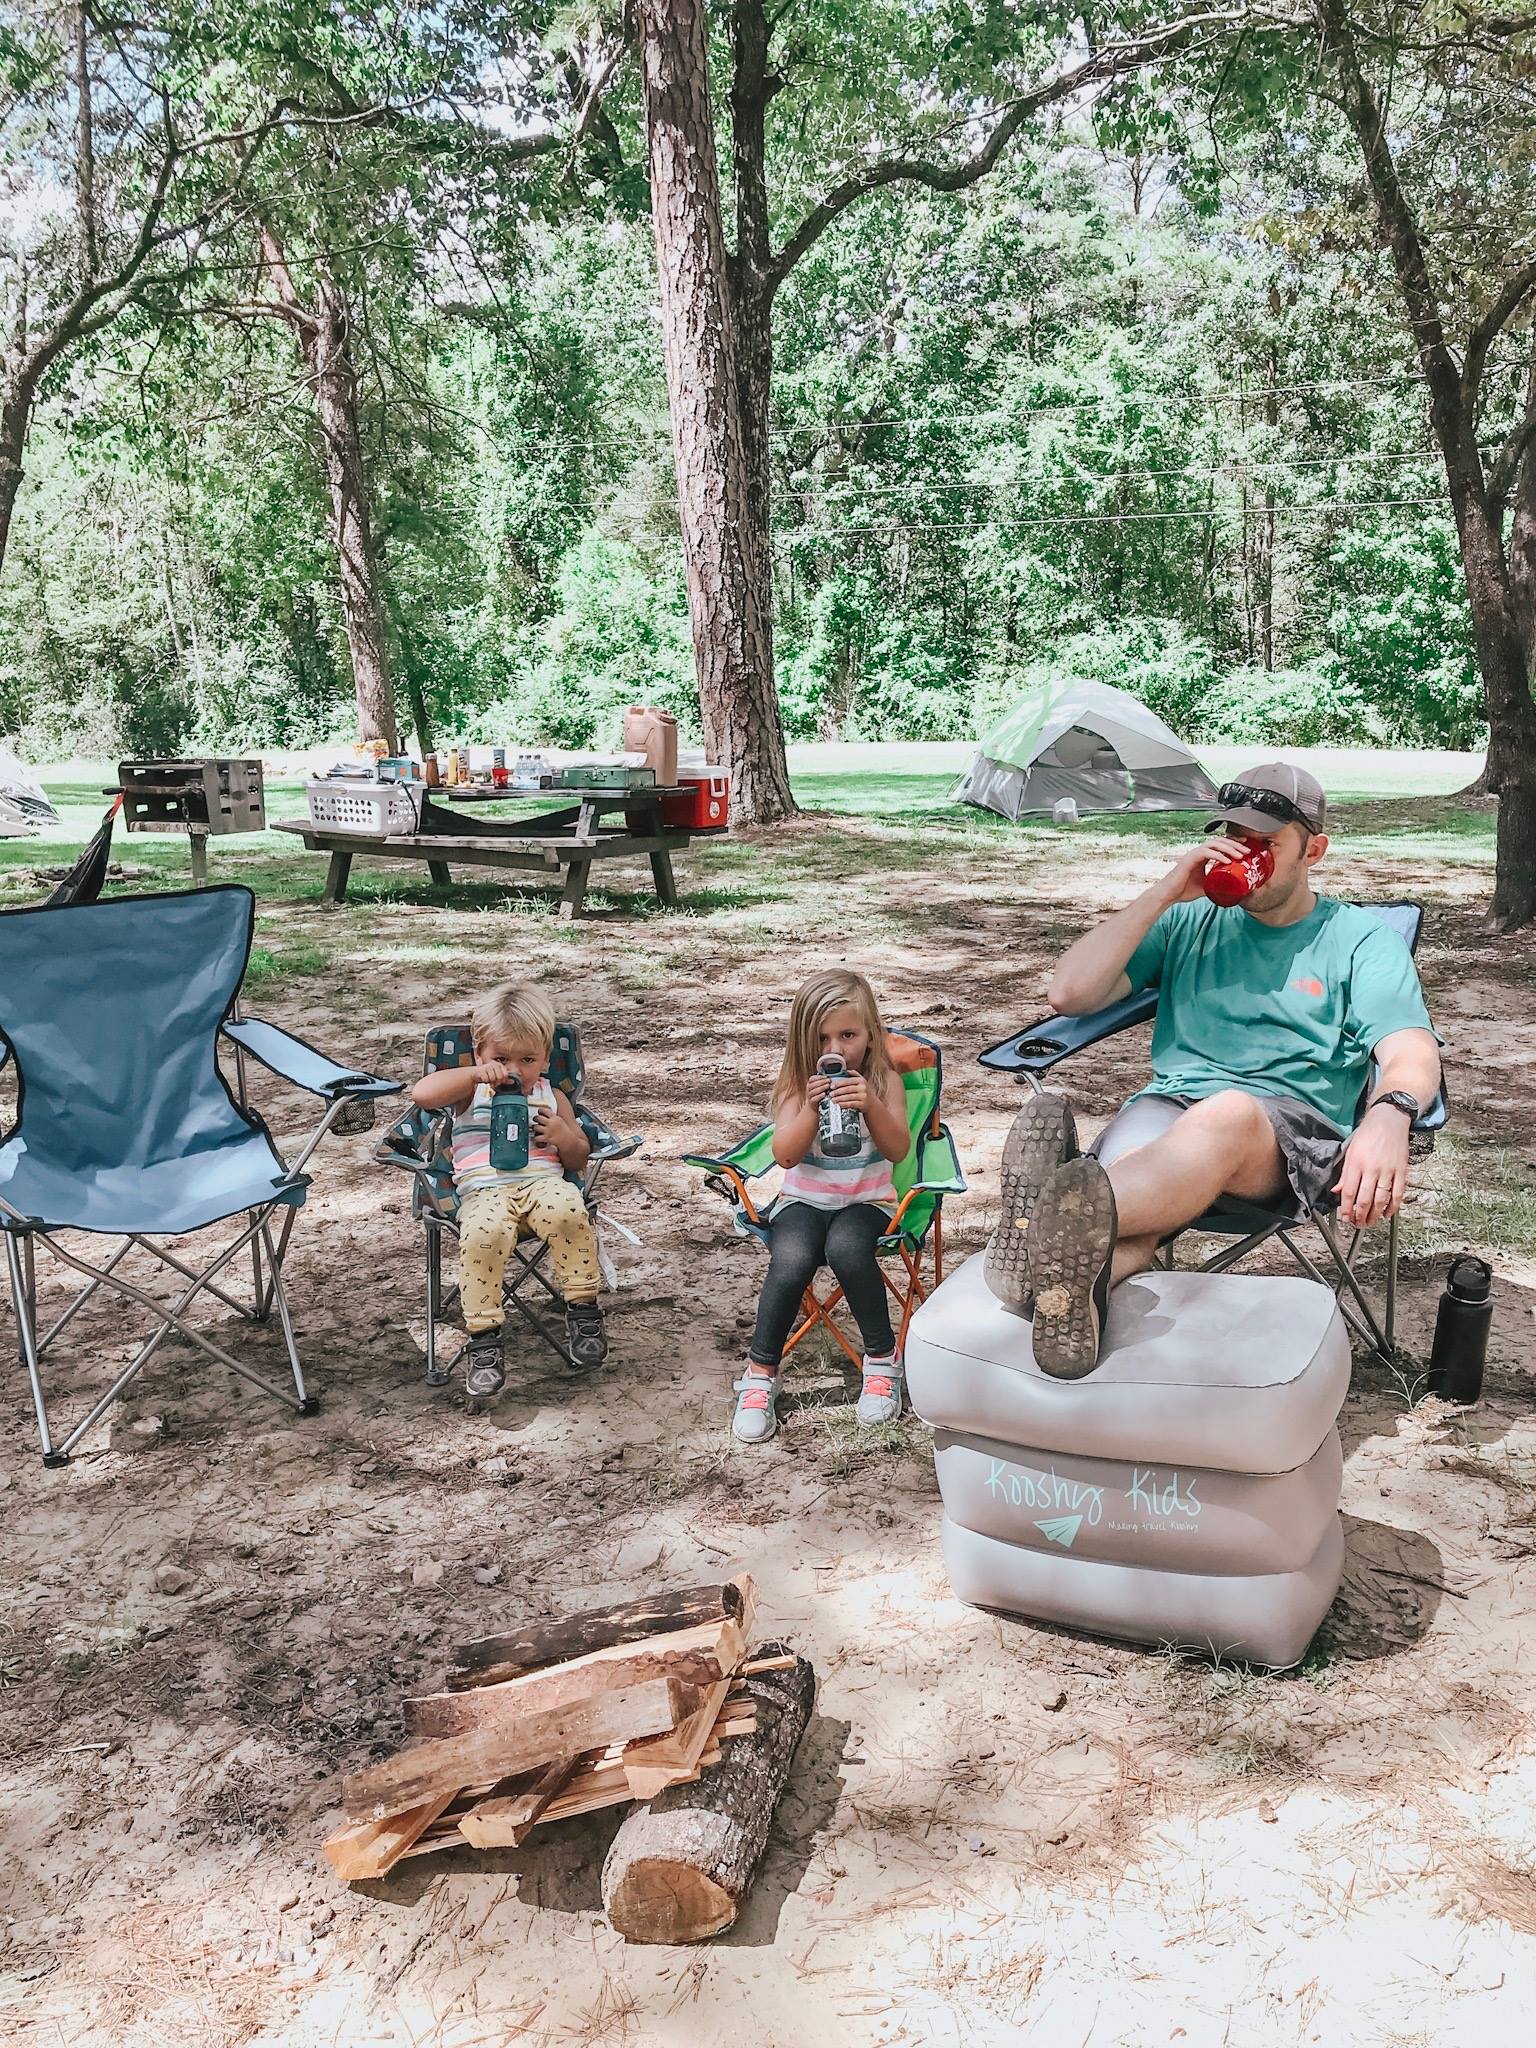 How to Make the Most of Camping With Kids